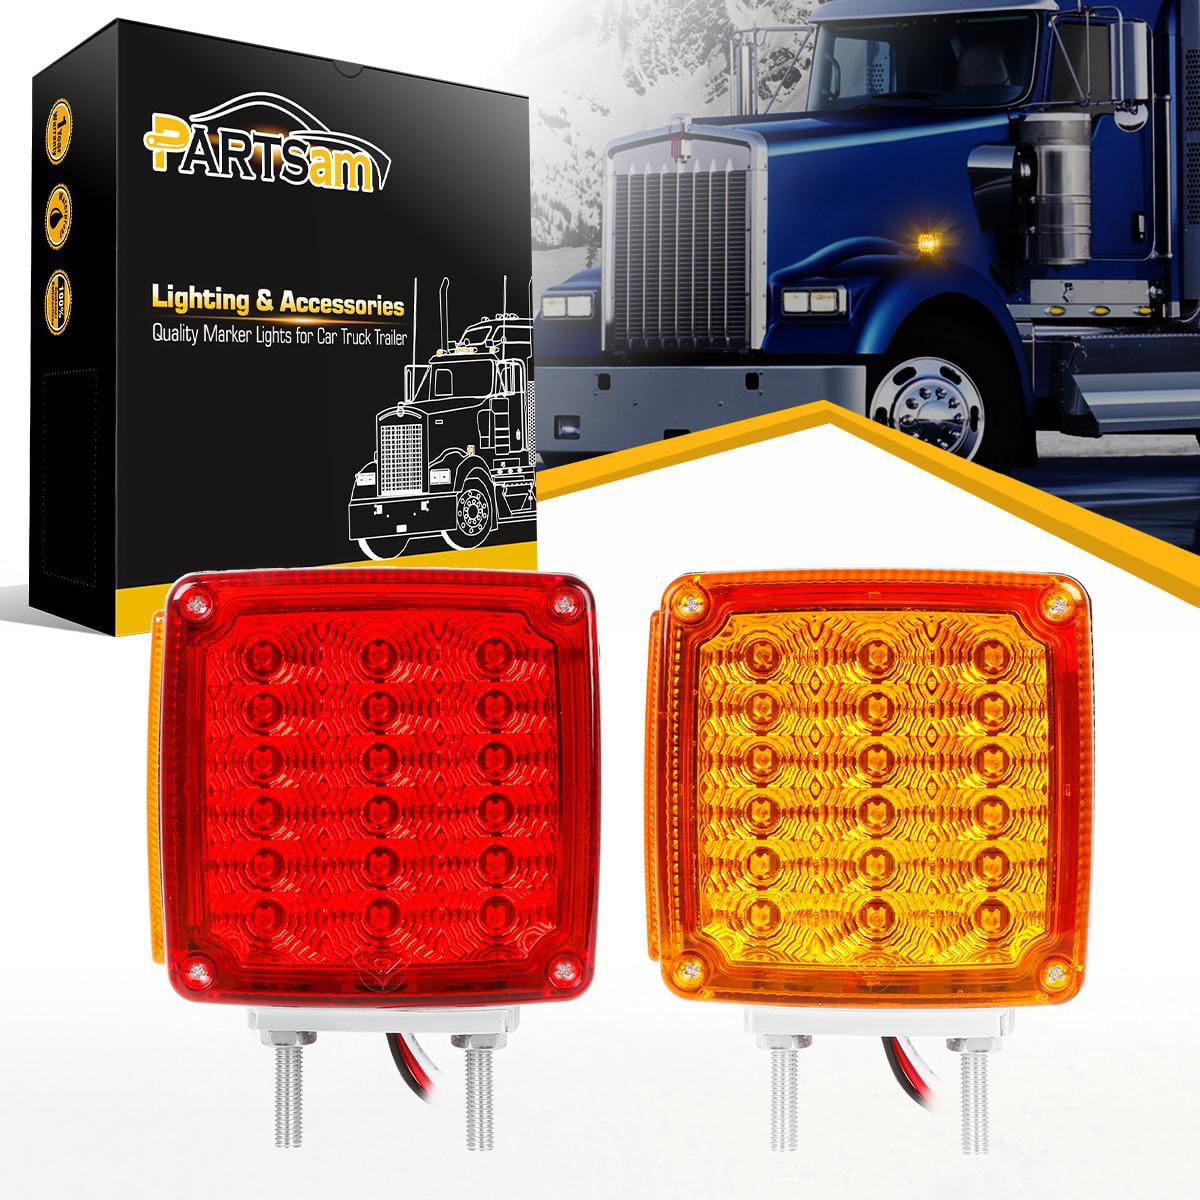 2x 39 LED Amber Red Double Face Stud Mount Pedestal Fender Stop Turn Tail Light